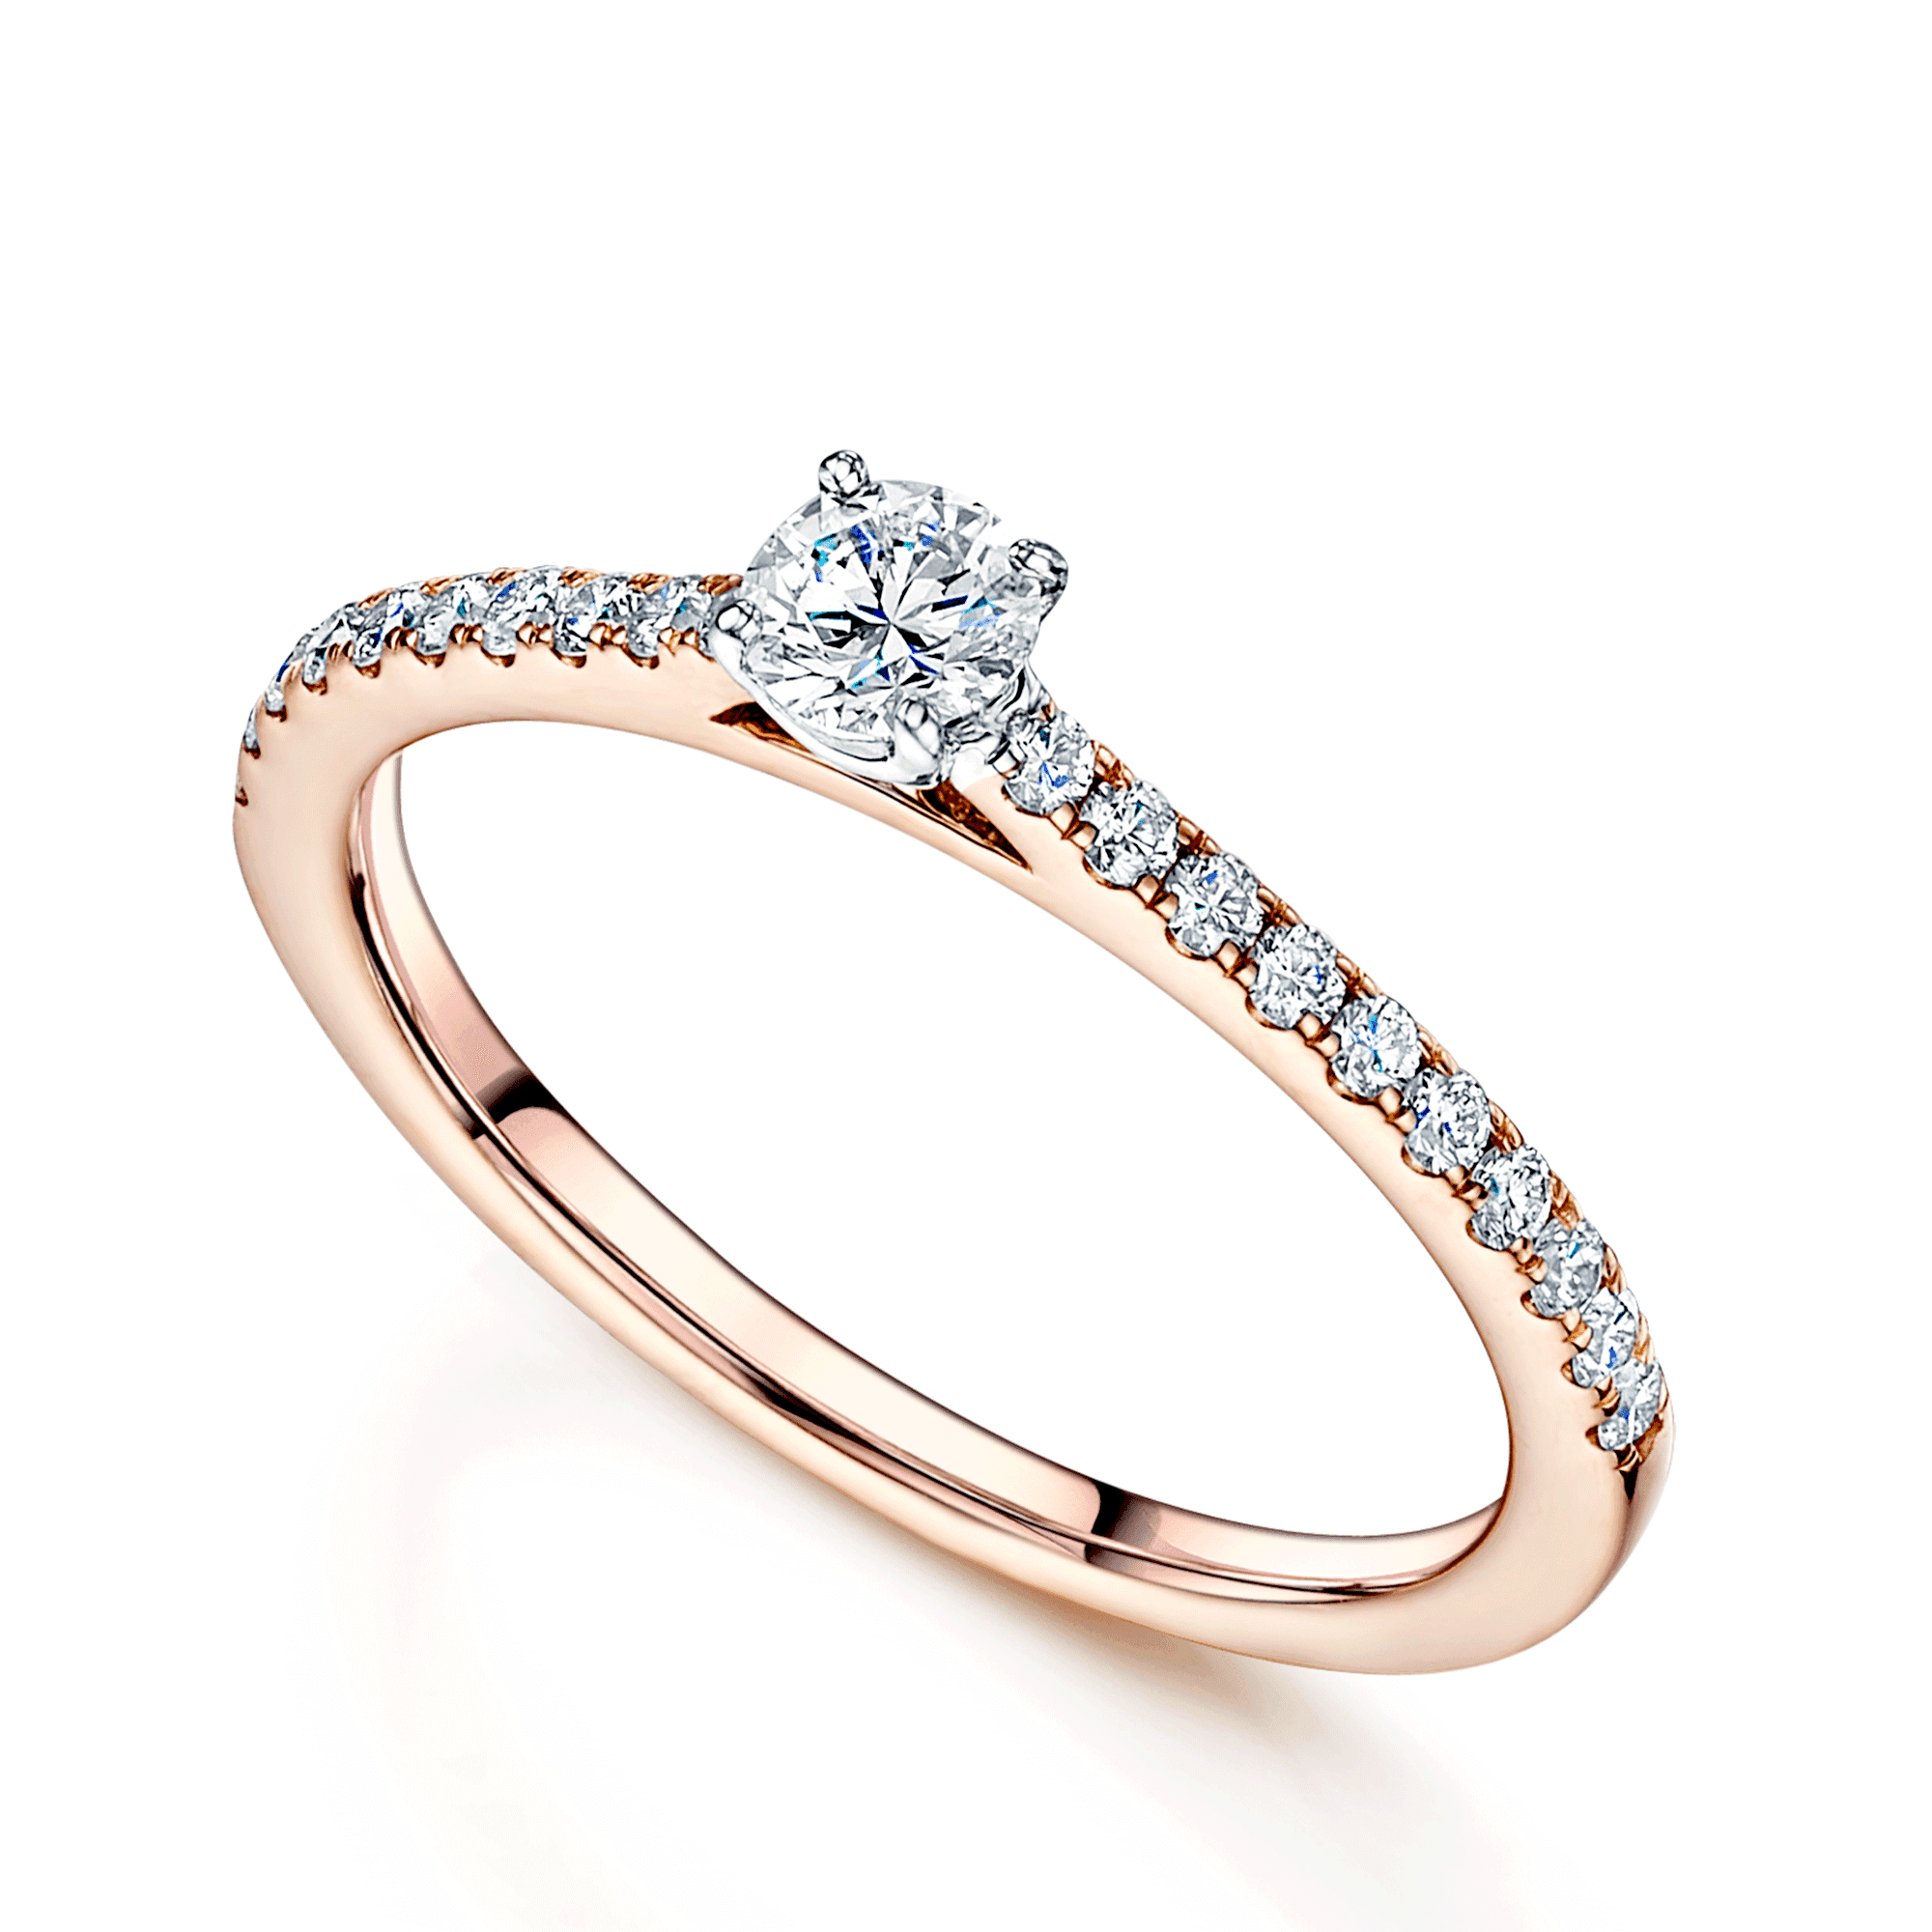 18ct Rose Gold Round Brilliant Cut Single Stone Ring With Micro Claw Set Shoulders